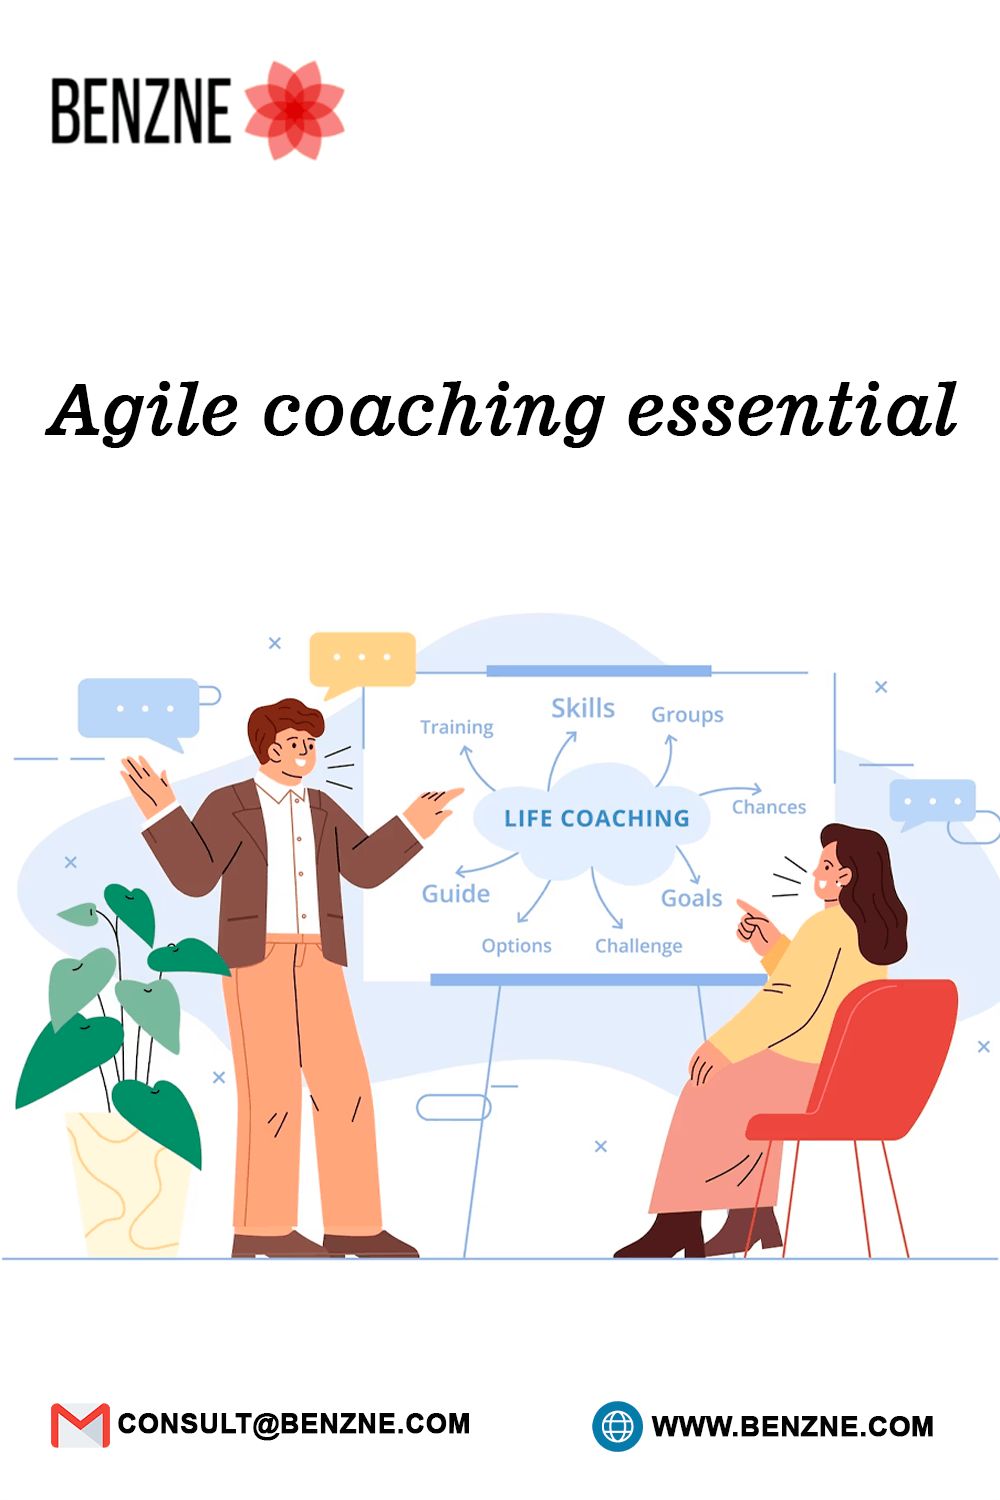 Get Powerful Agile Coaching Essential With Benzne And Stay Ahead In The Competition